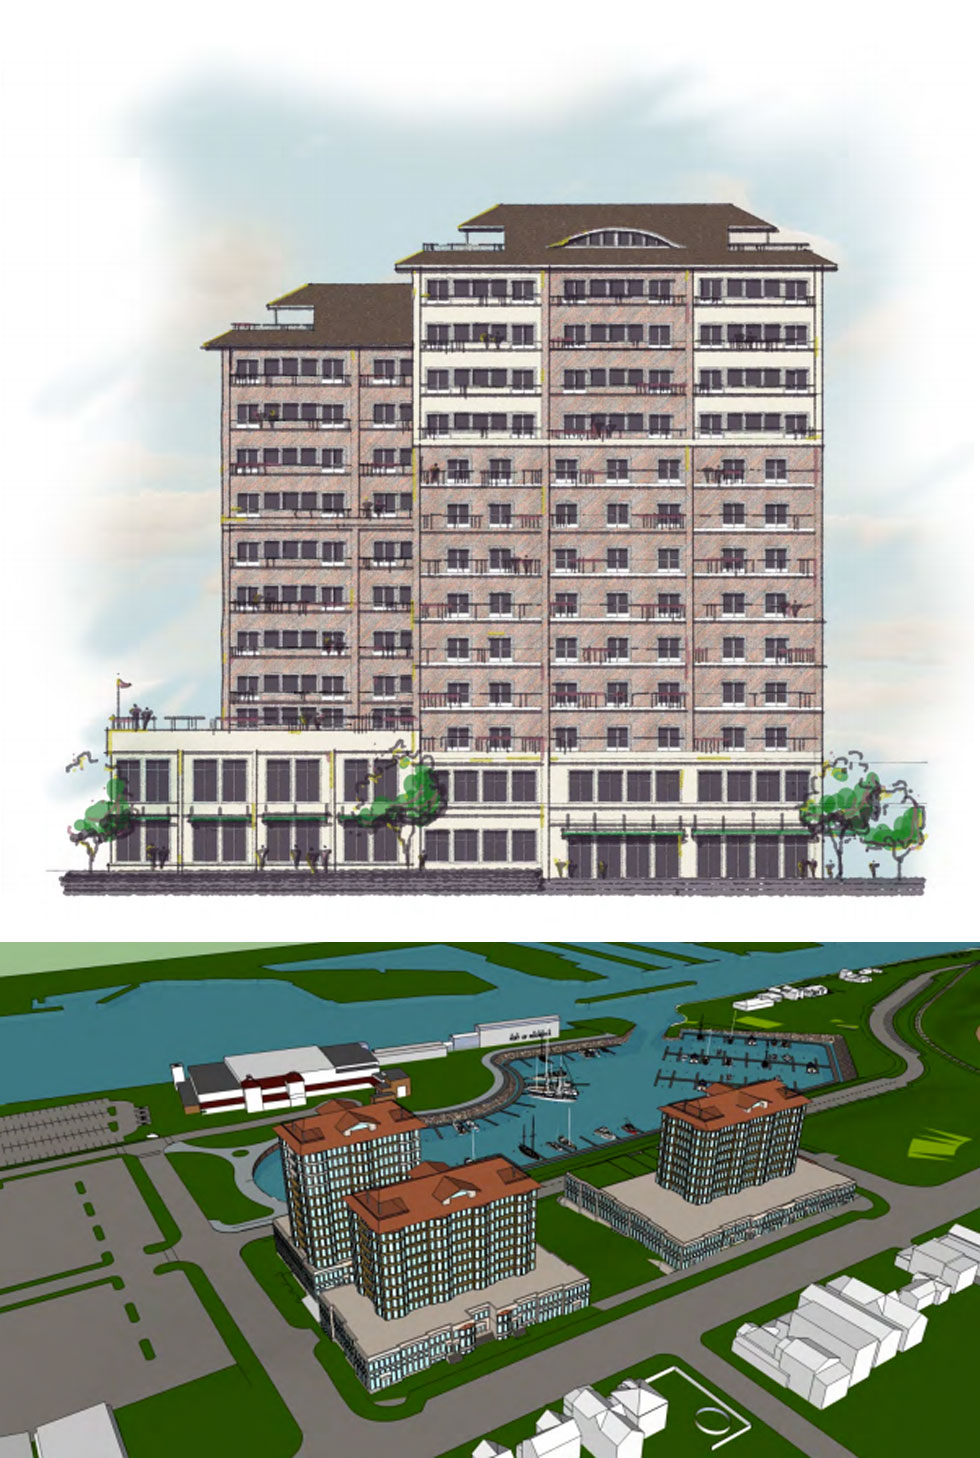 Rochester Waterfront, proposed development at Port of Rochester.